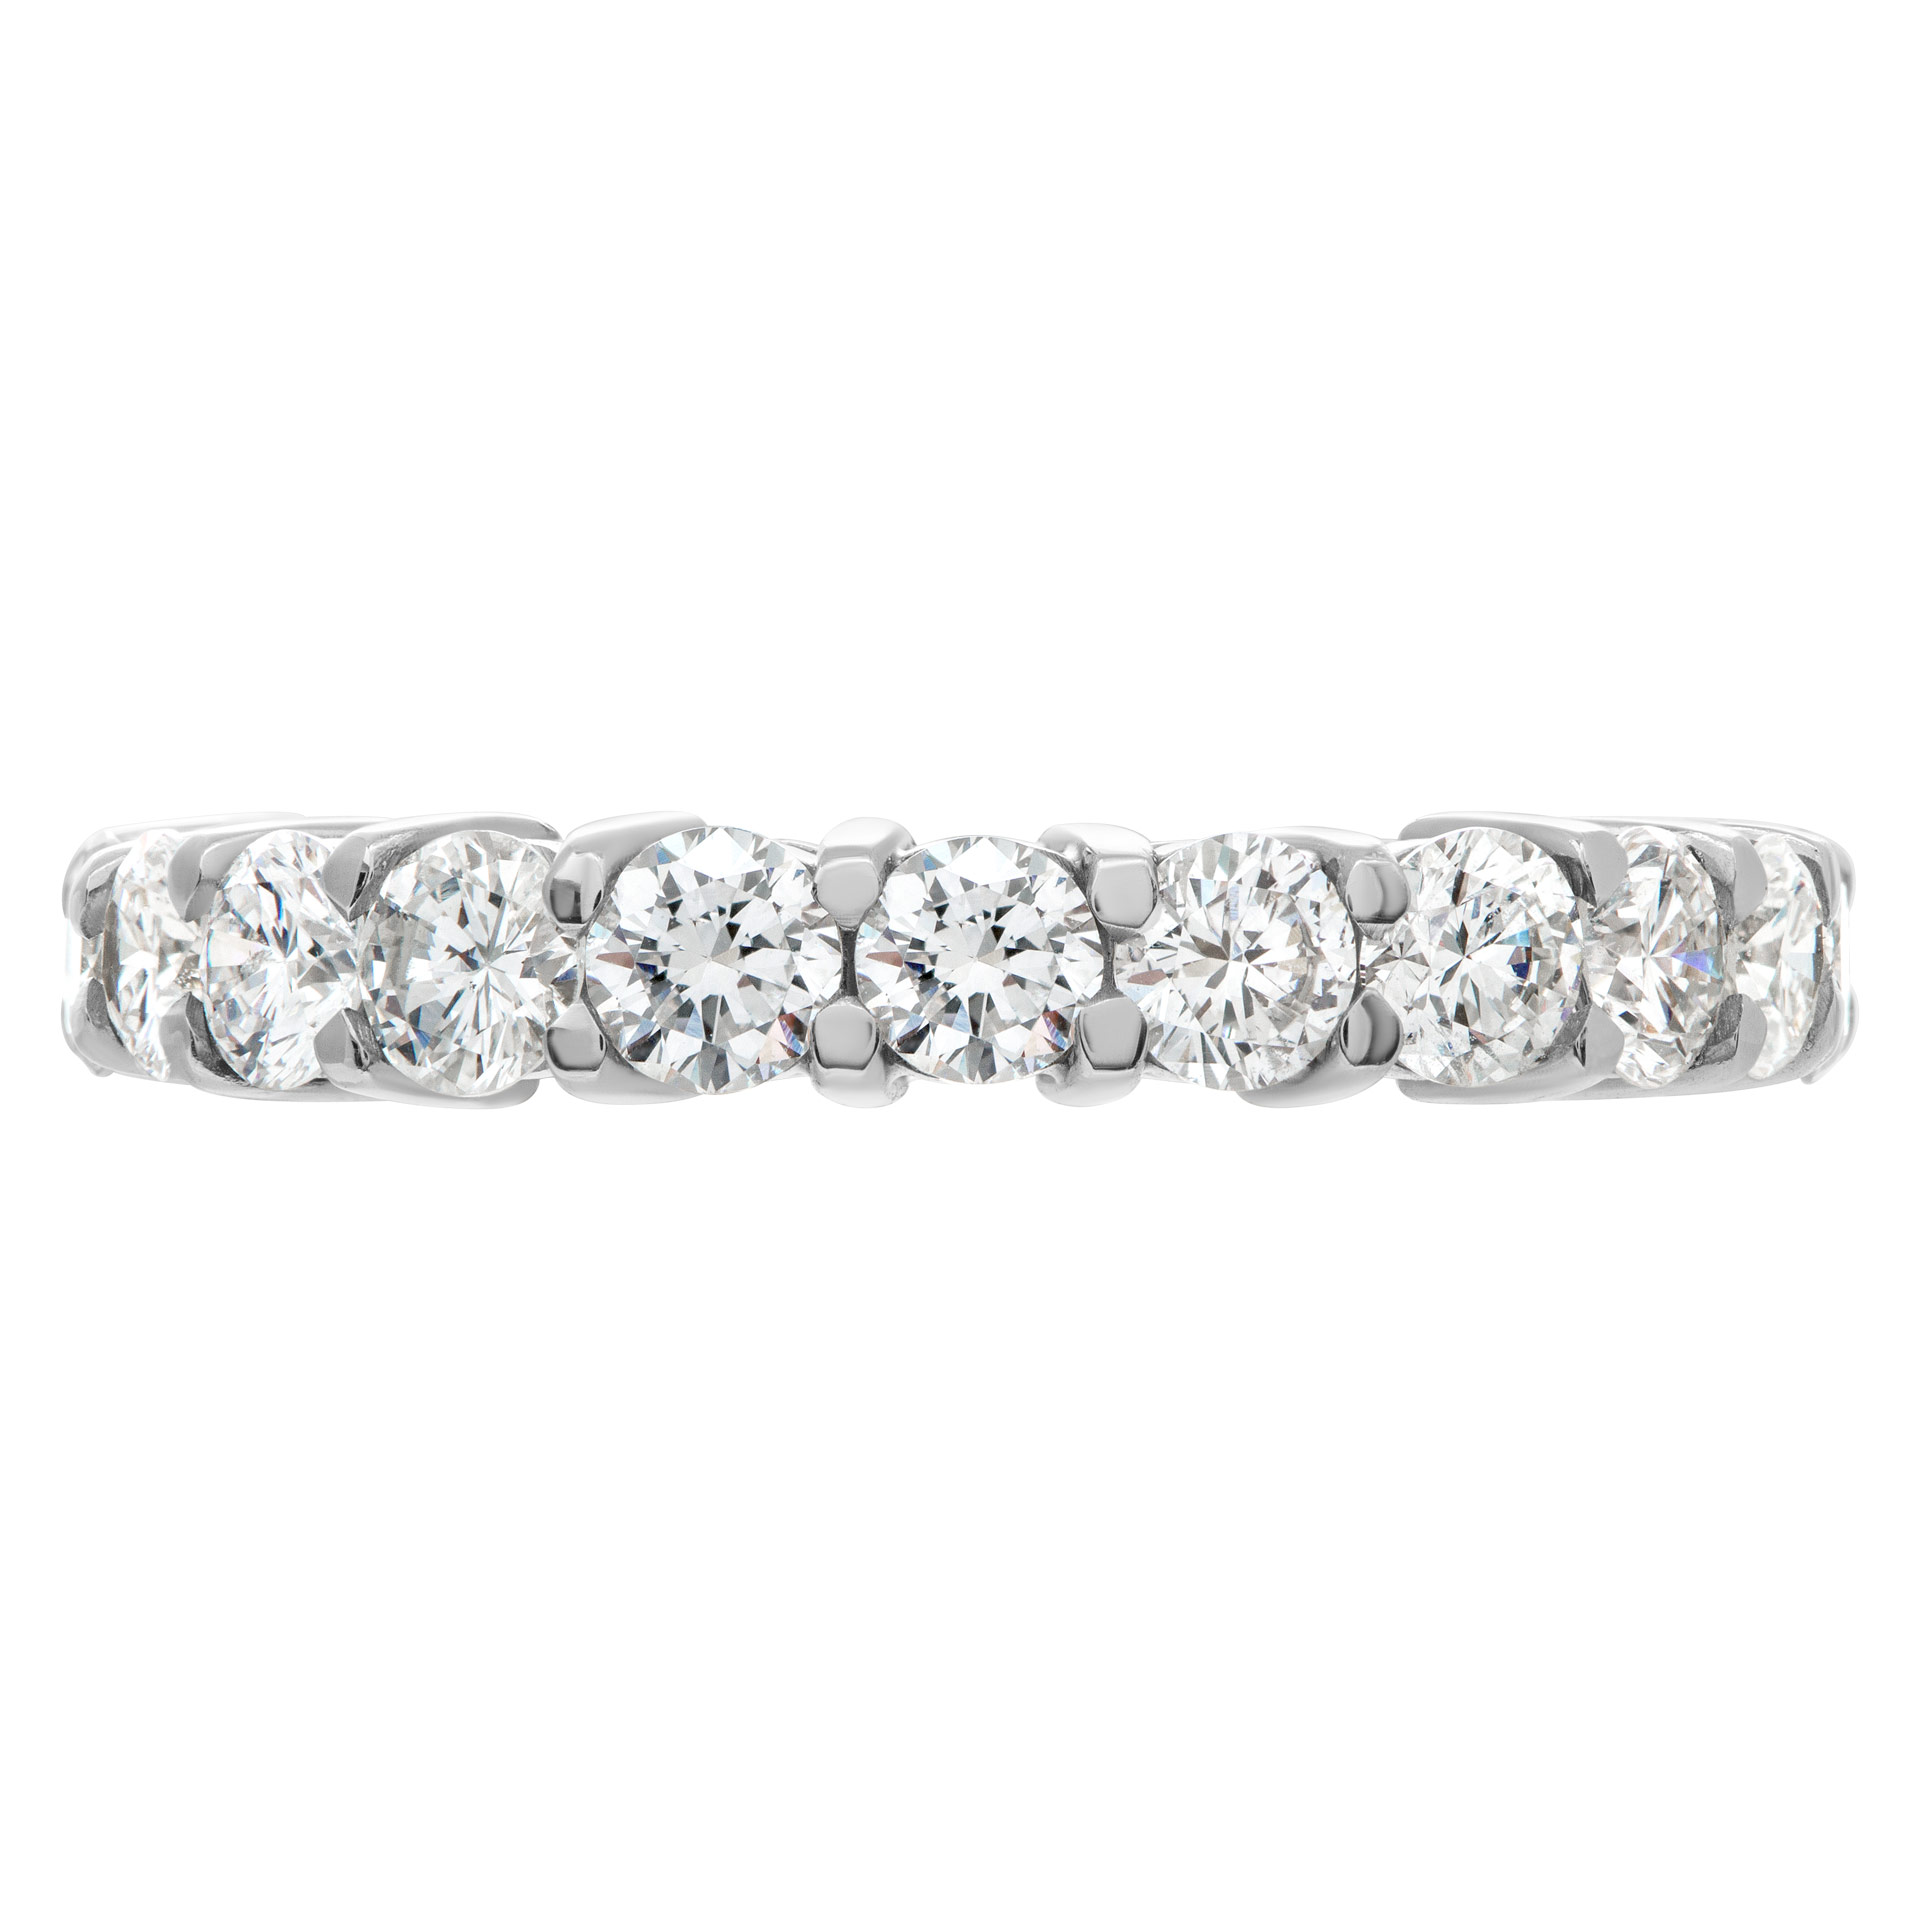 Round brilliant cut Diamonds eternity band in Platinum. Round brilliant cut diamonds total approx. weight: 2.72 carats. Size 5.75 image 2